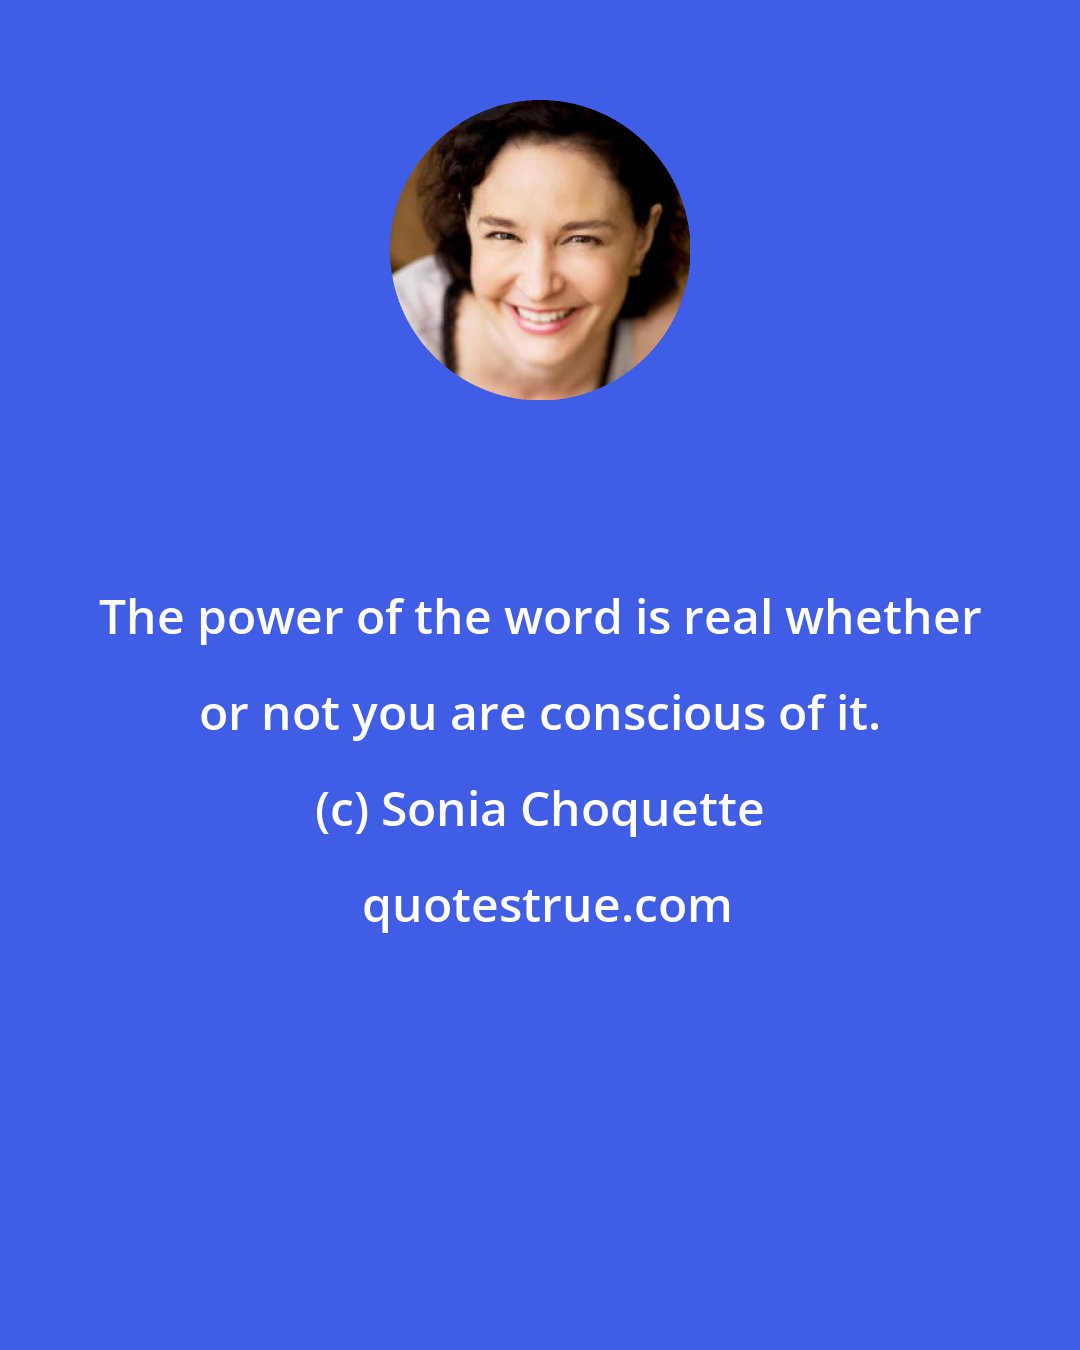 Sonia Choquette: The power of the word is real whether or not you are conscious of it.